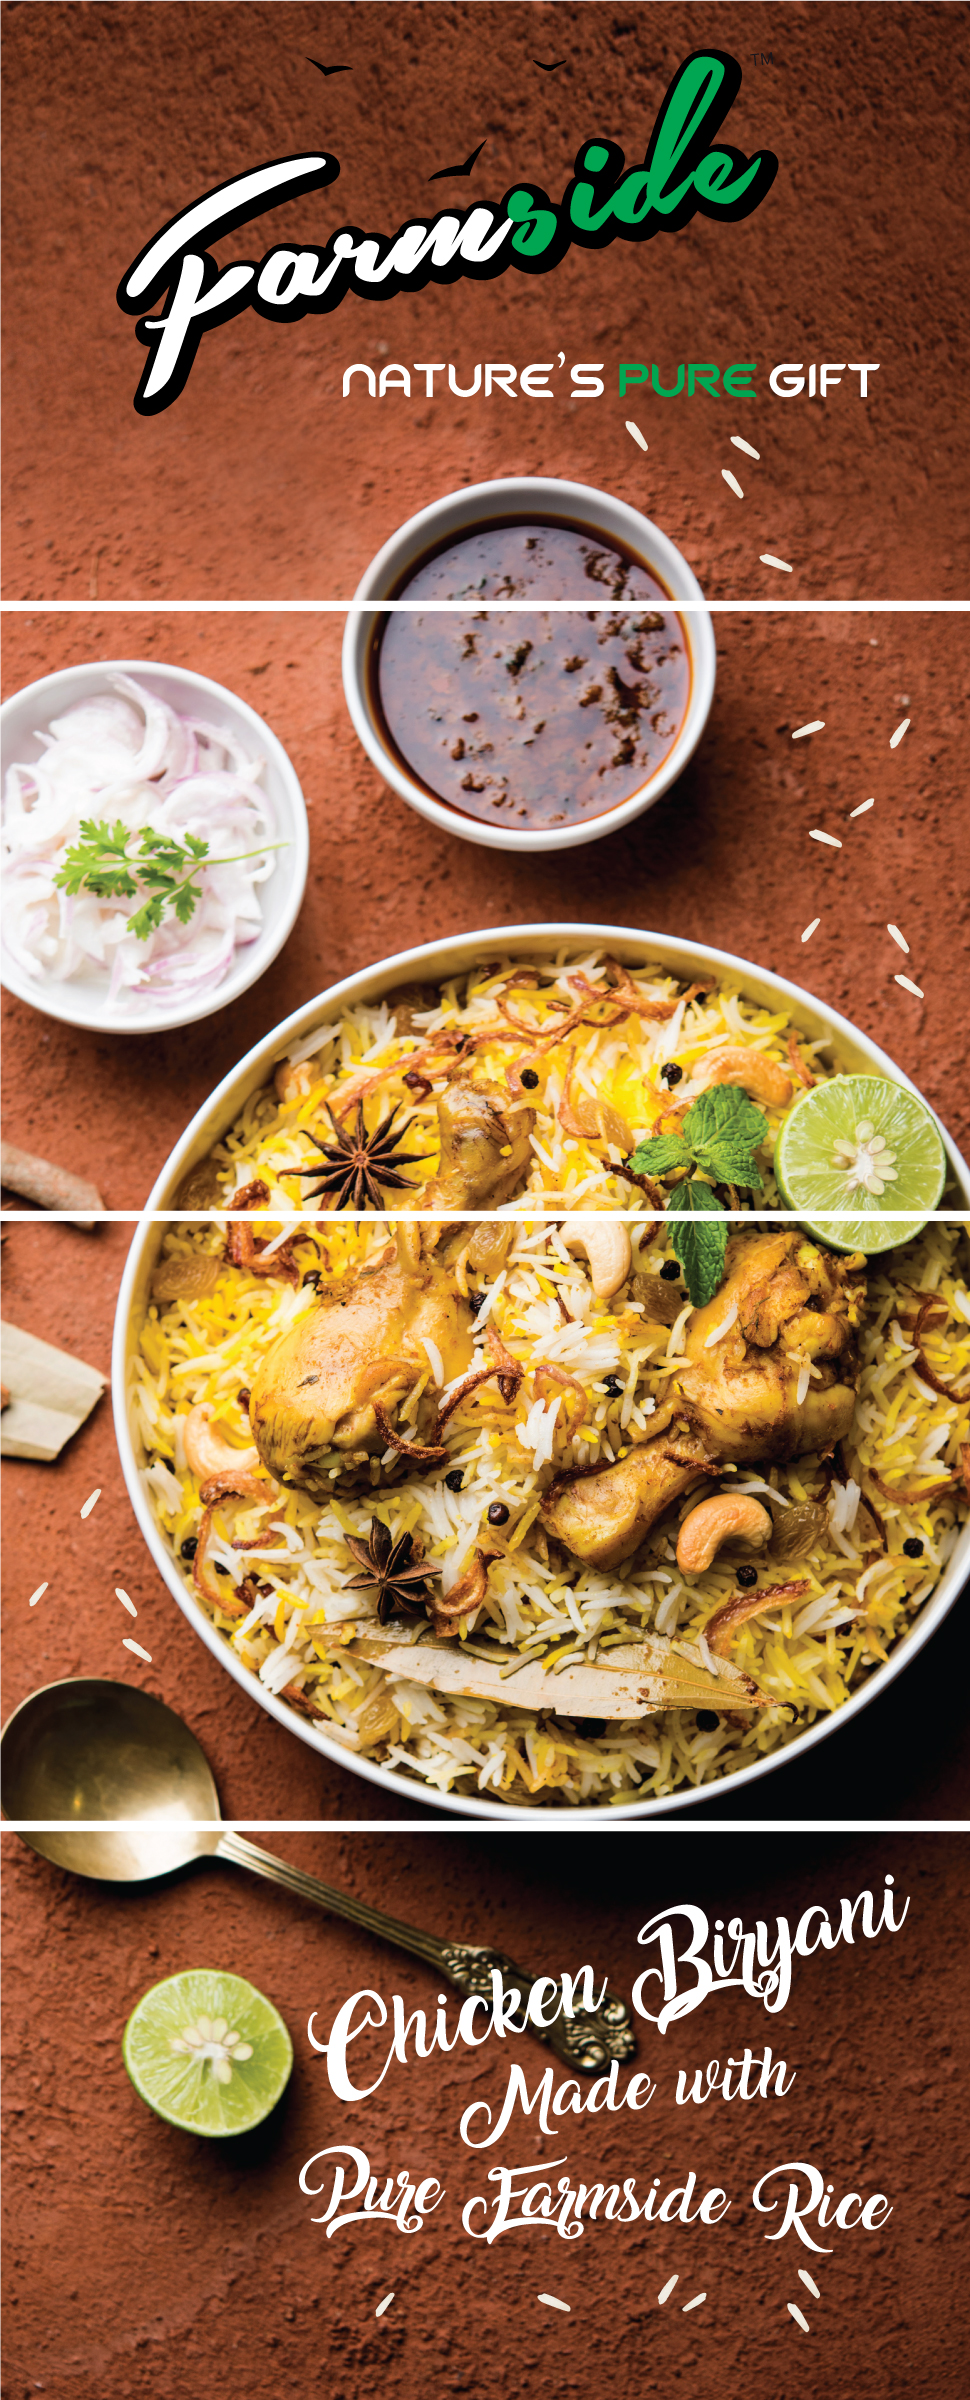 Image of A-plus content with an image of Chicken Biryani served bowl.